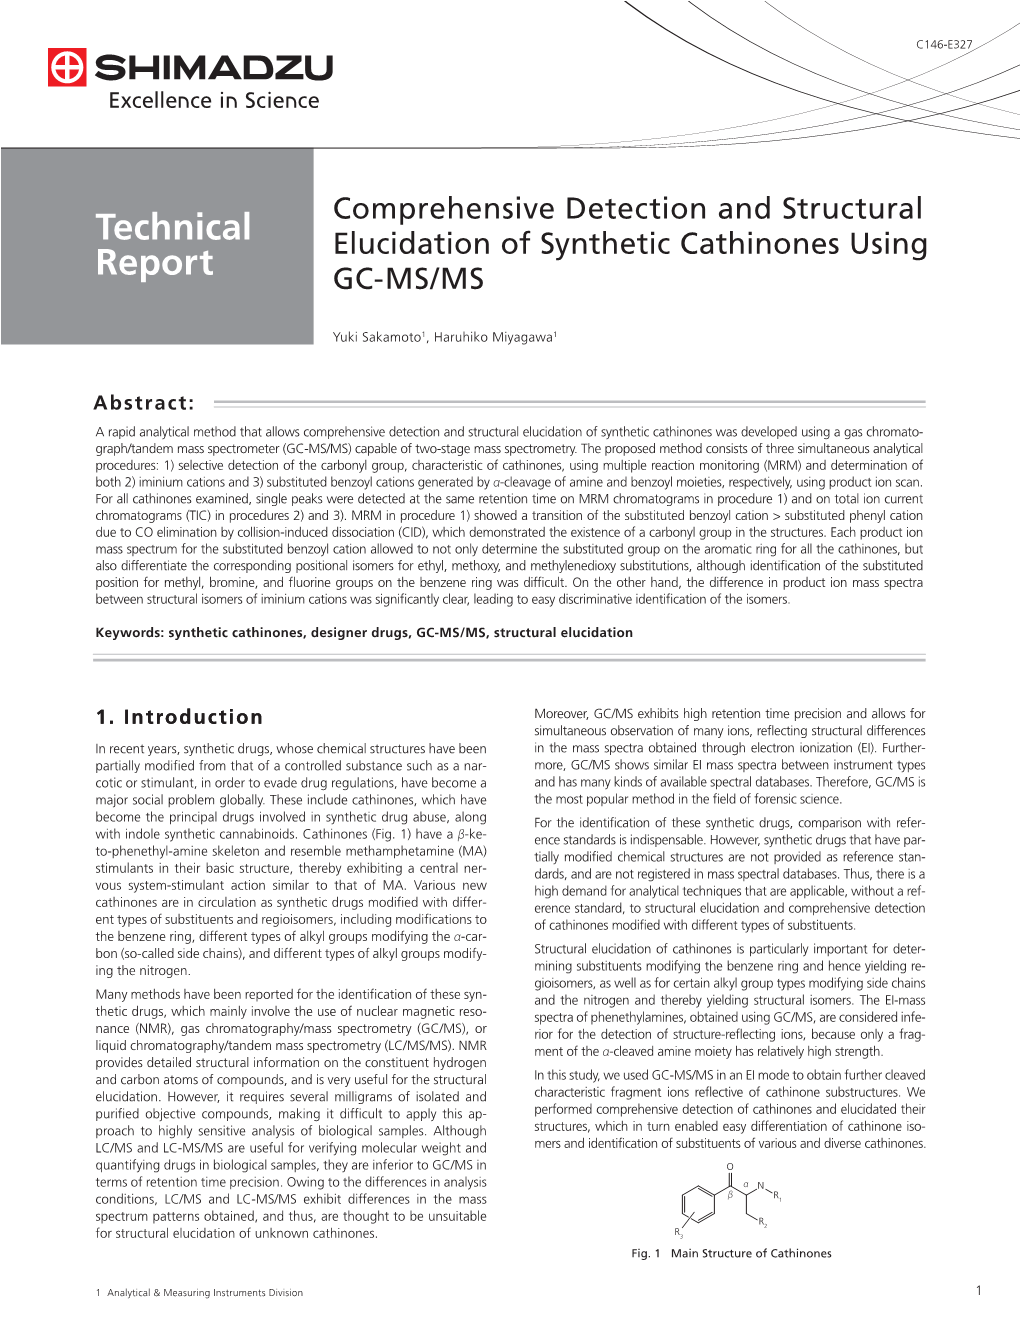 Comprehensive Detection and Structural Elucidation of Synthetic